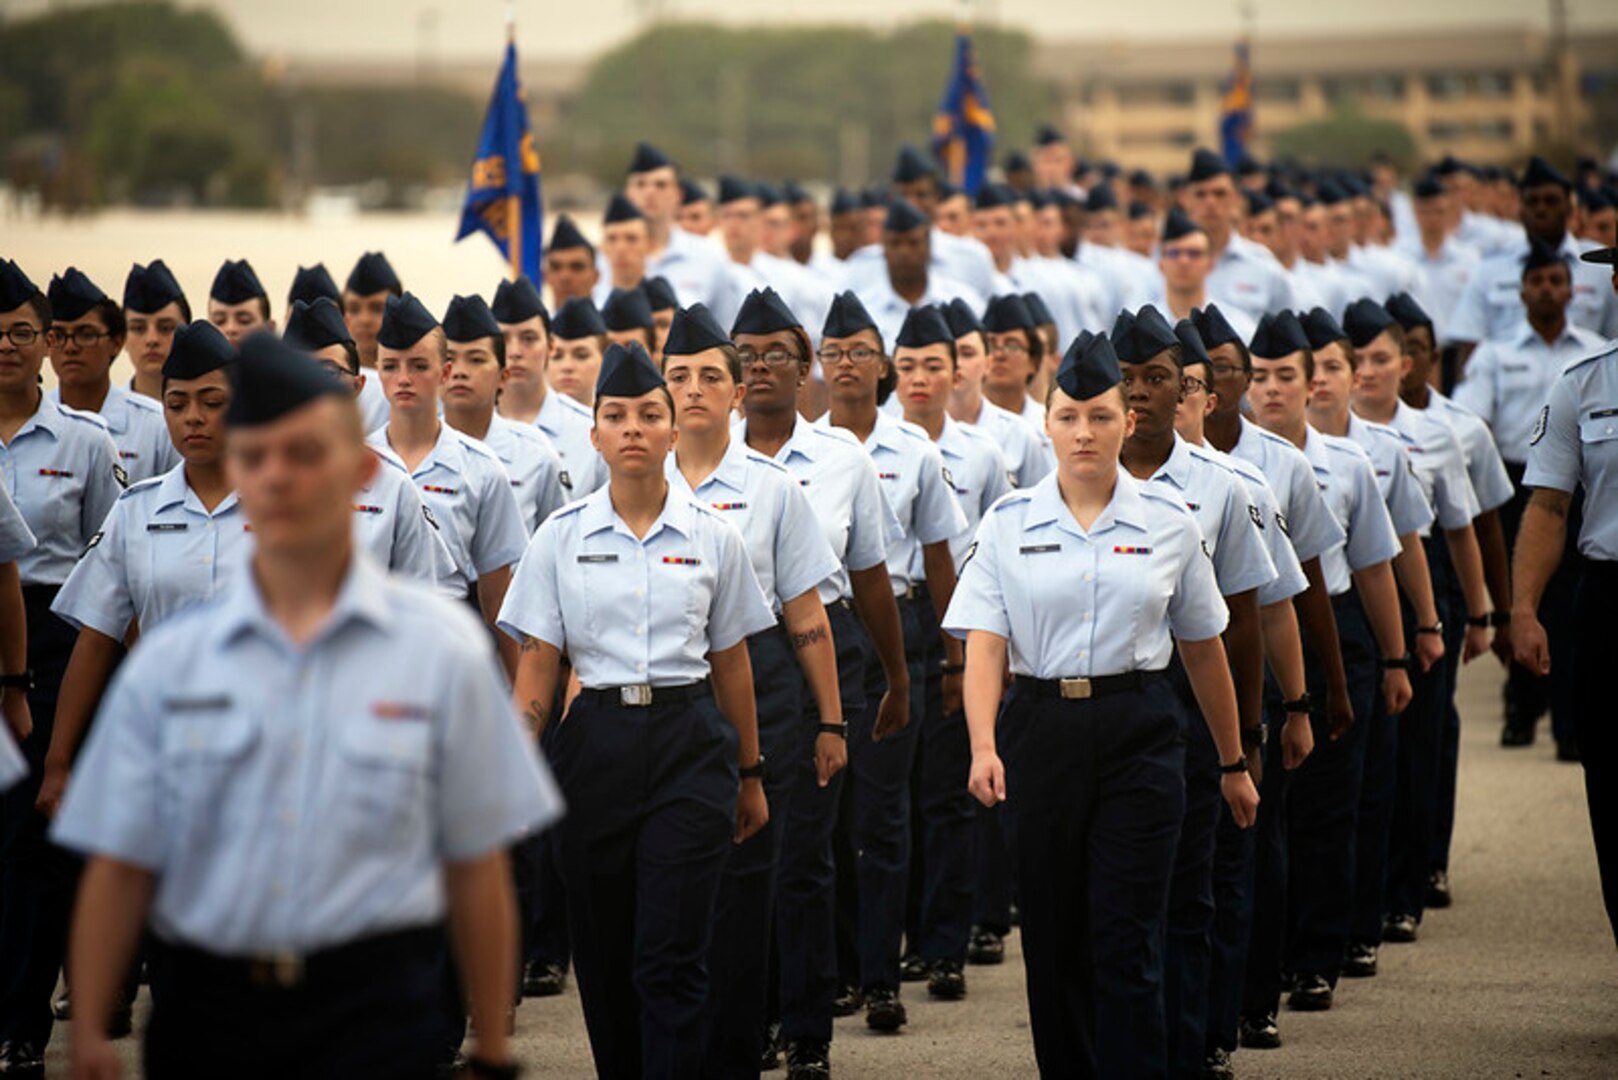 Basic Military Trainees march to their graduation ceremony.